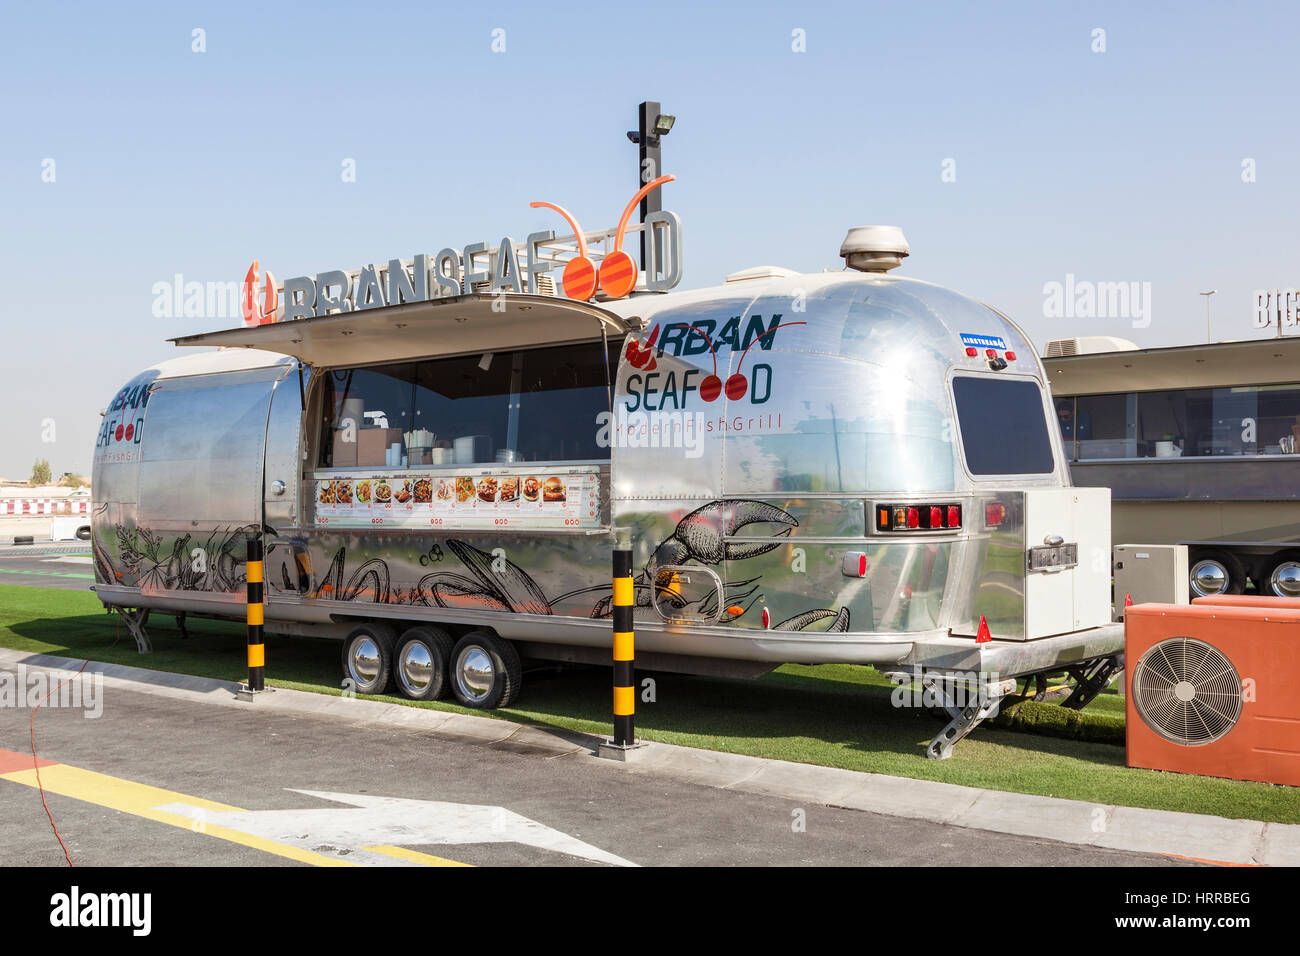 DUBAI, UAE - NOV 27, 2016: Airstream caravan converted to the Urgan Seafood truck at the Last Exit food trucks park on the E11 highway between Abu Dha Stock Photo